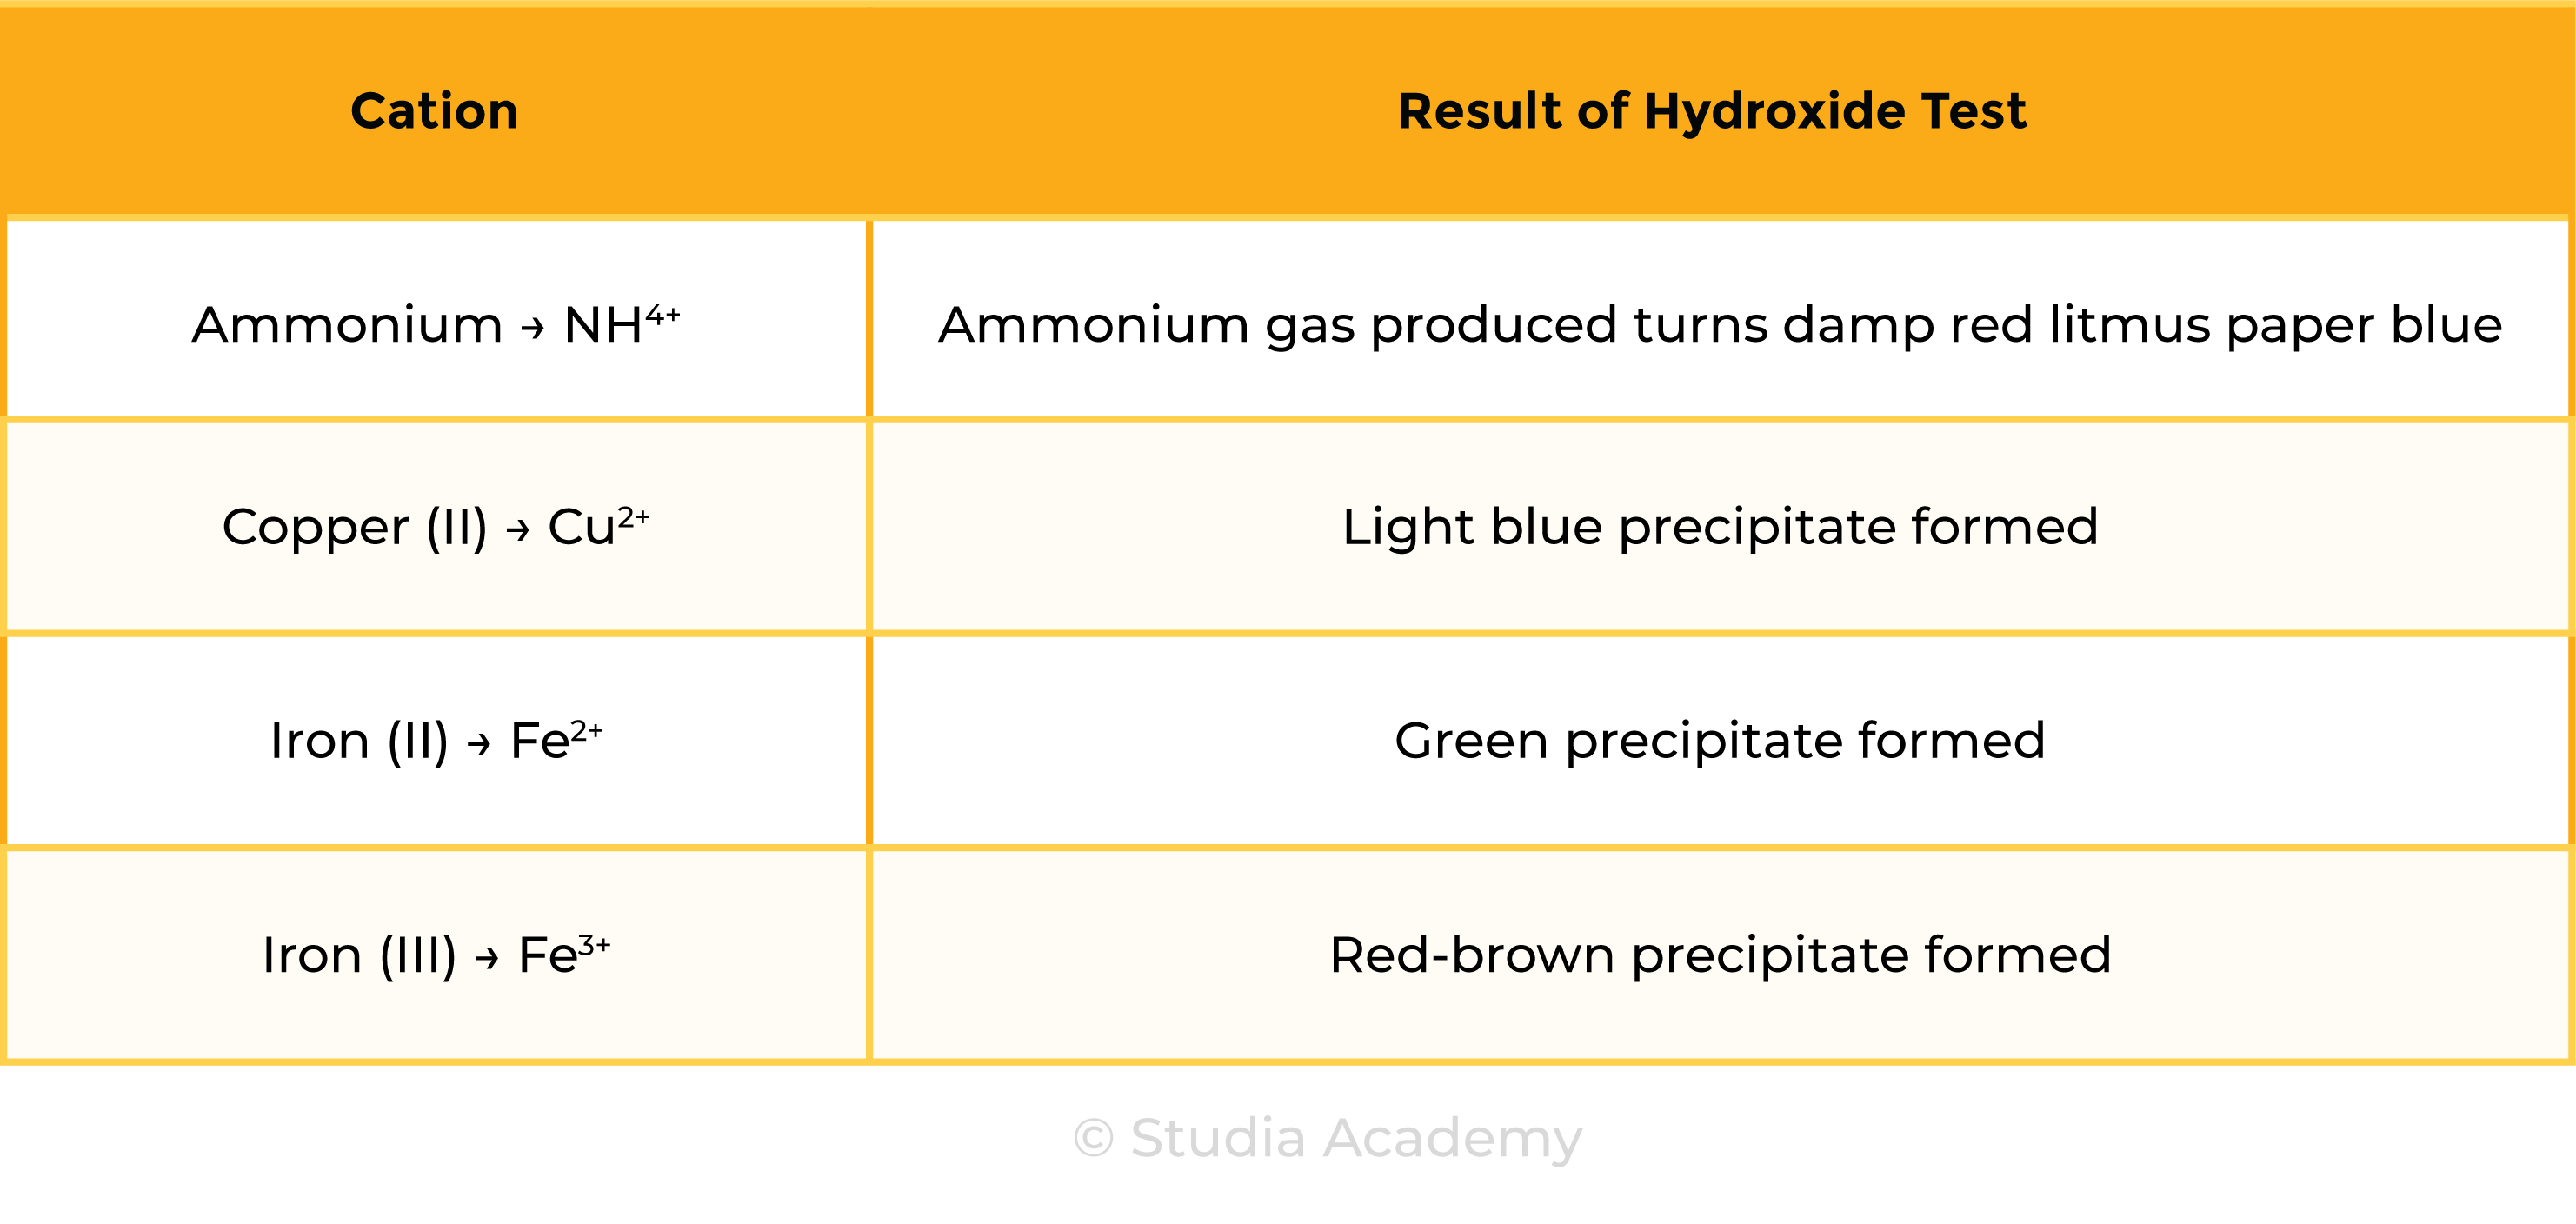 edexcel_igcse_chemistry_topic 17 tables_chemical tests_003_cation tests